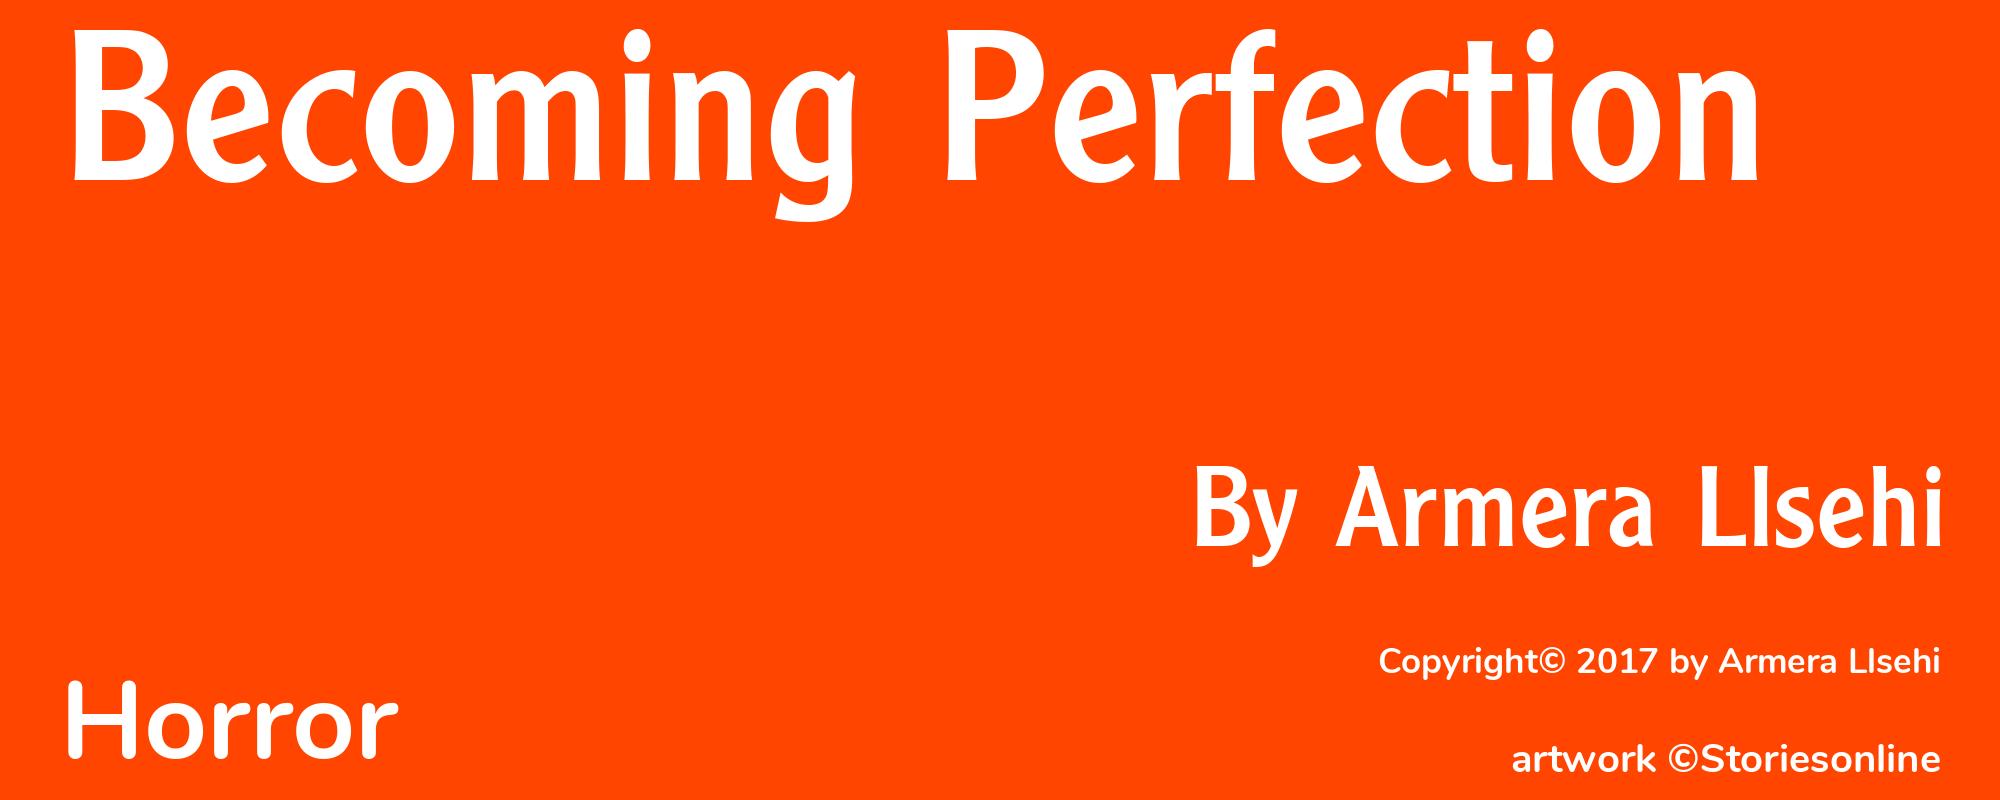 Becoming Perfection - Cover